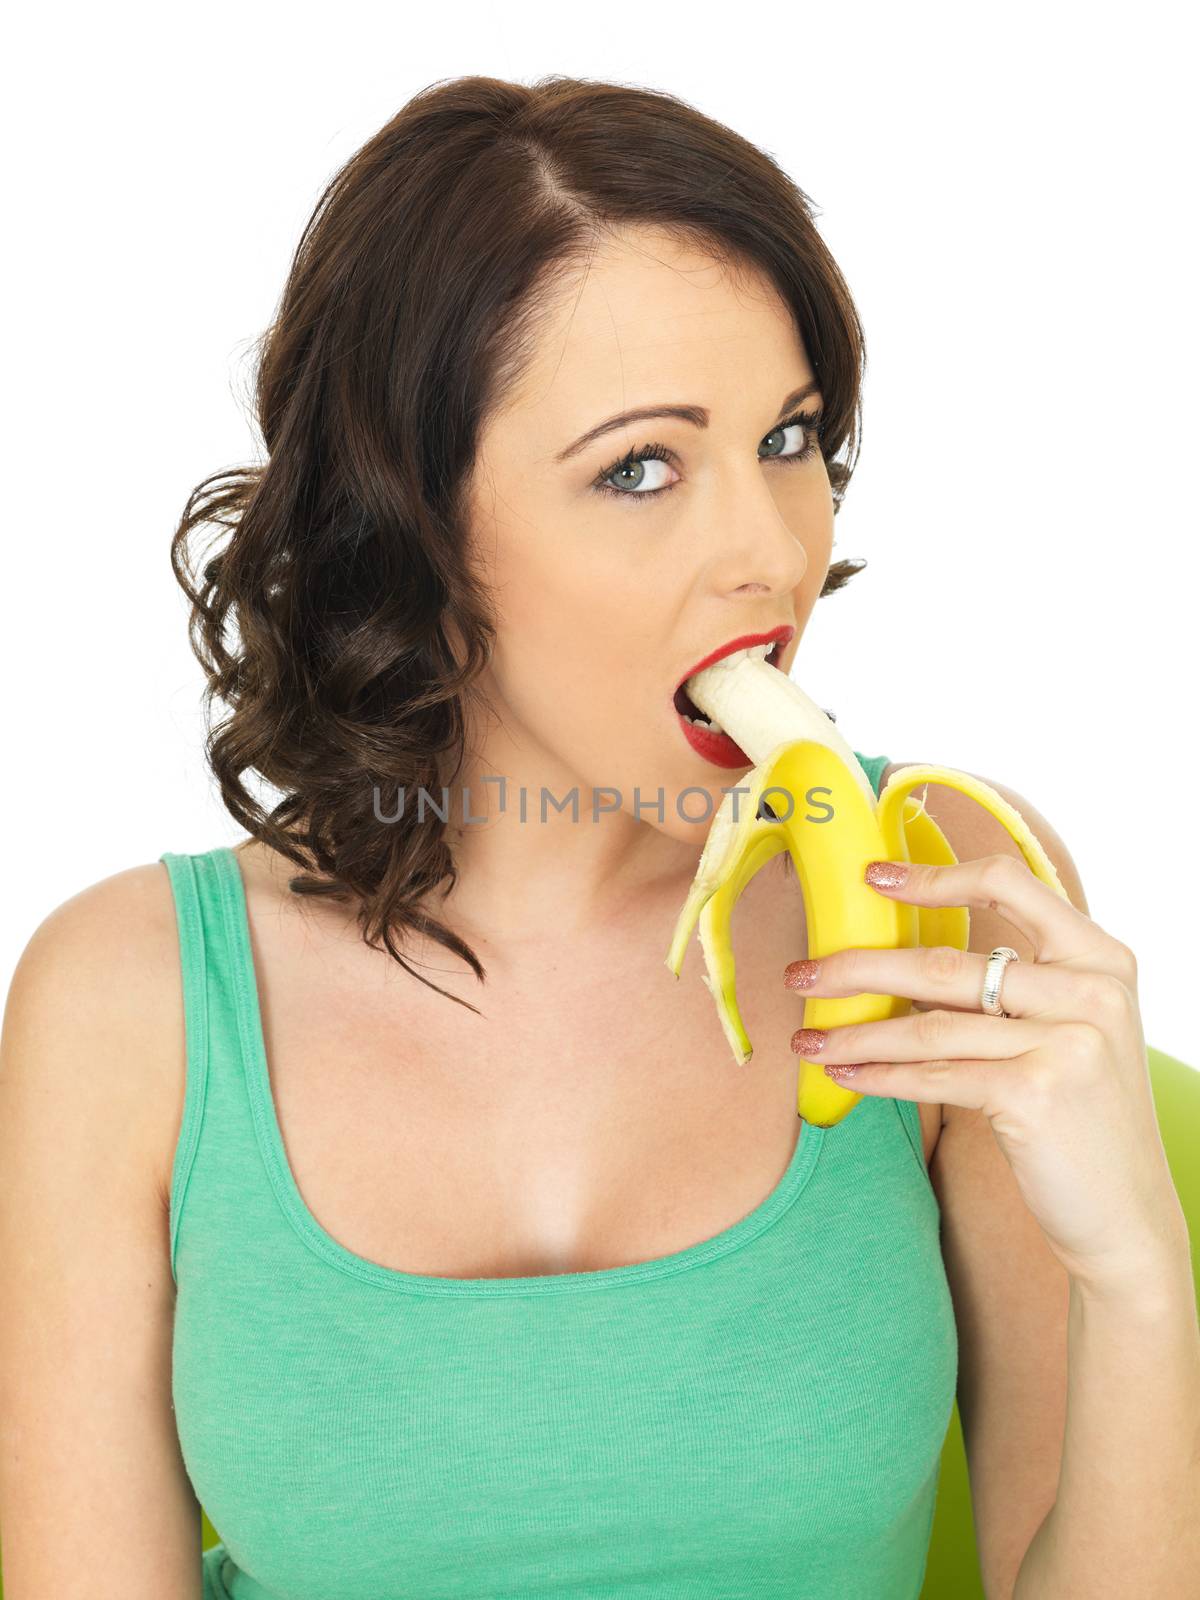 Young Woman Eating a Banana by Whiteboxmedia